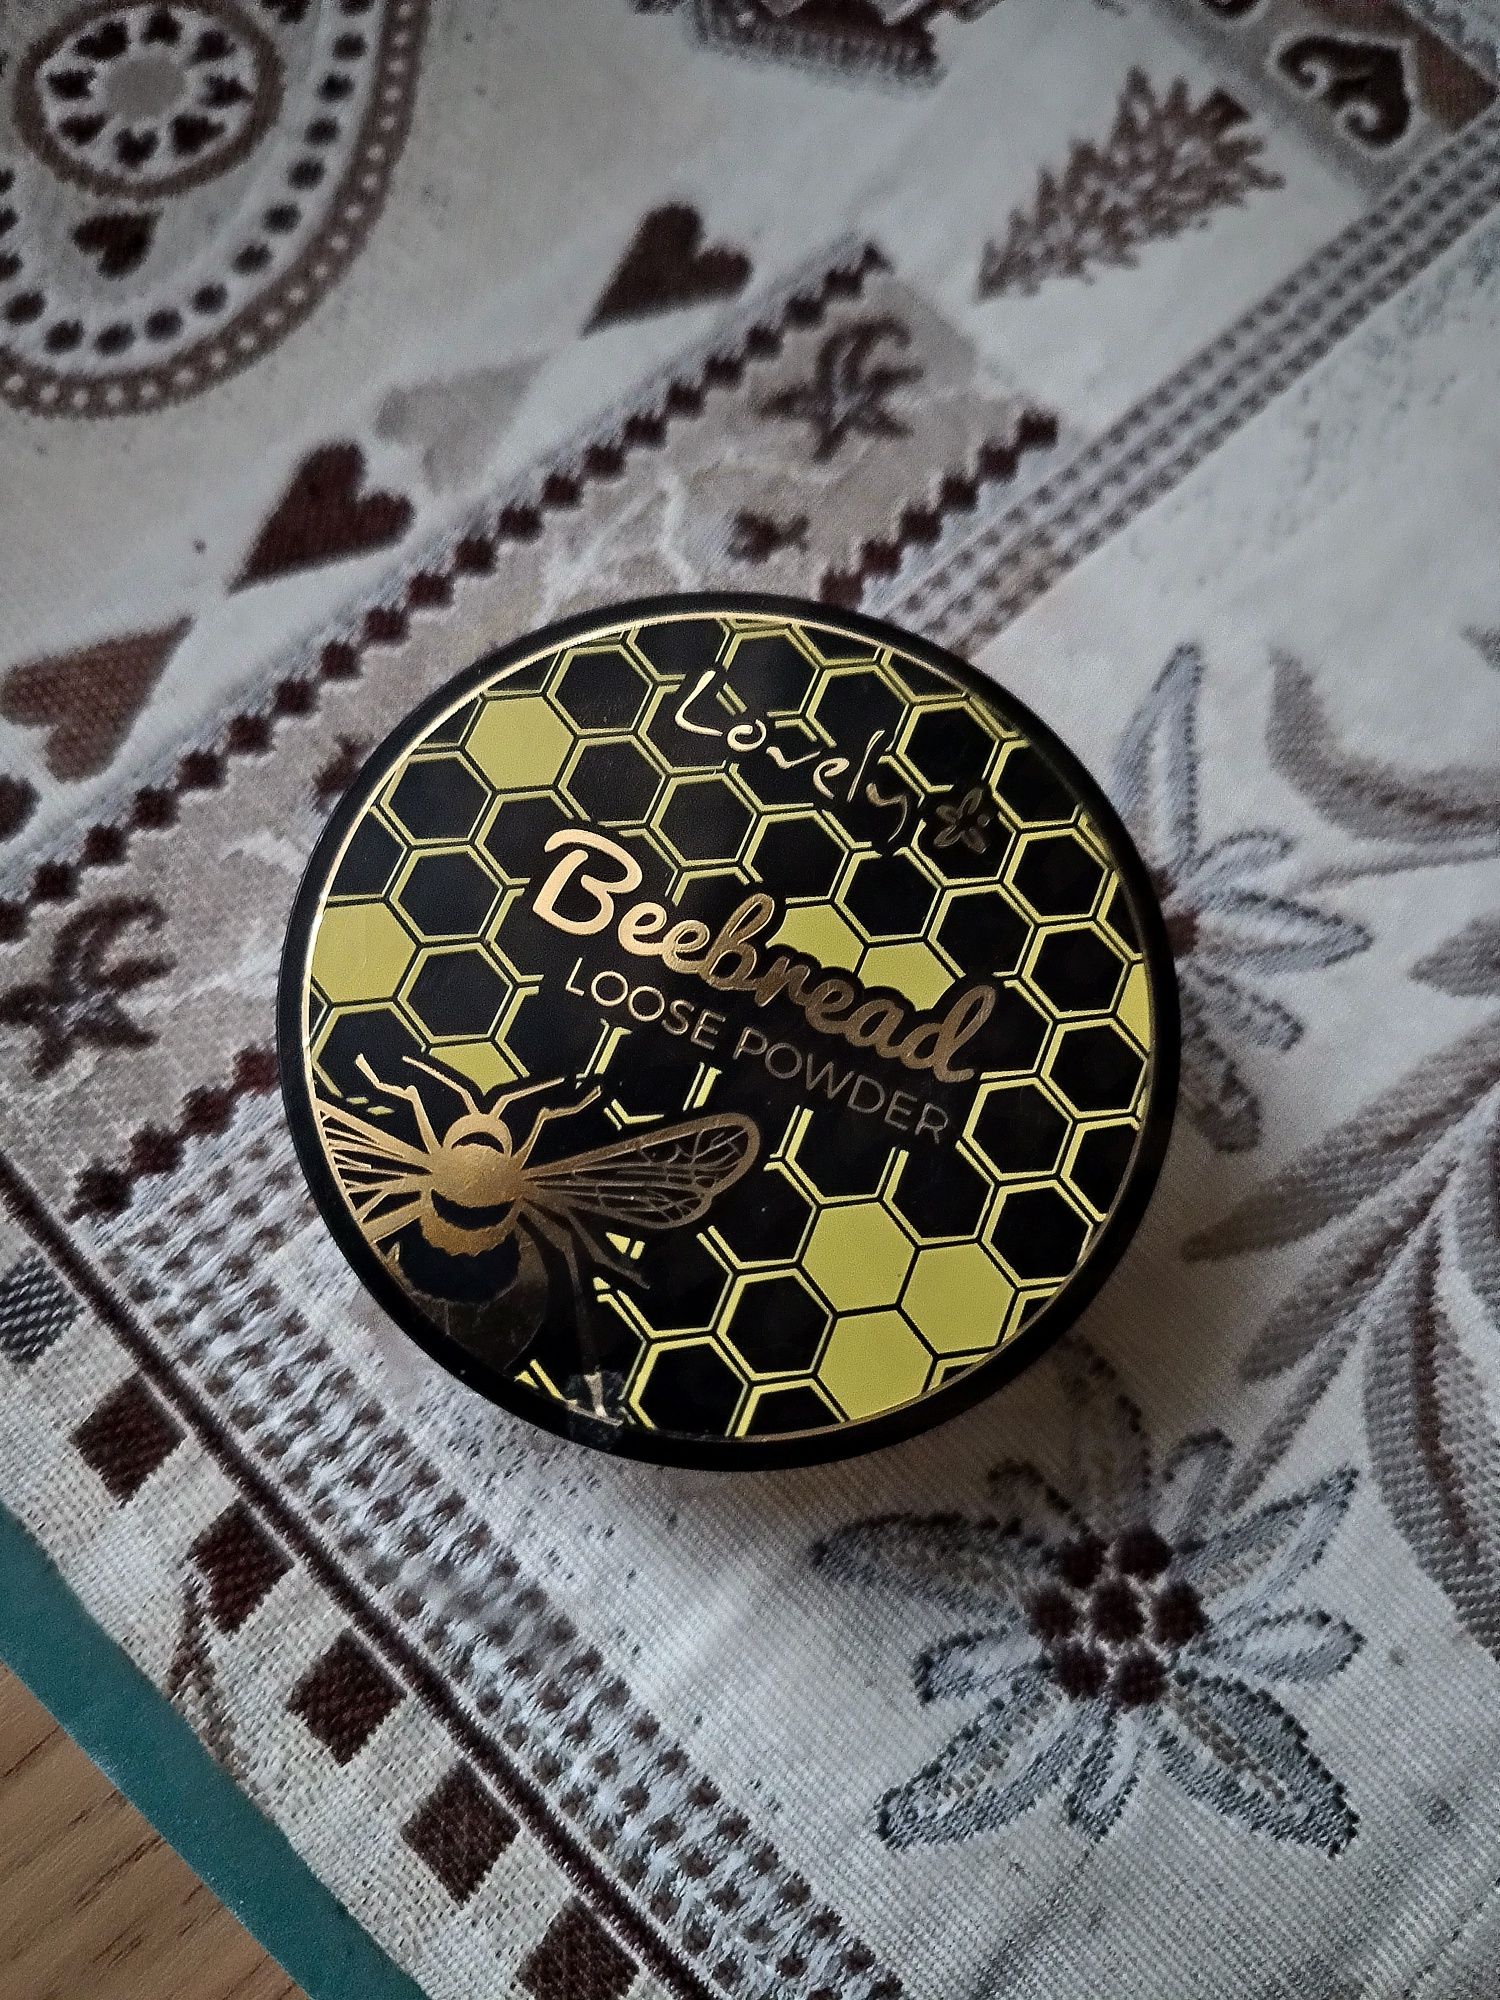 Lovely beebread puder